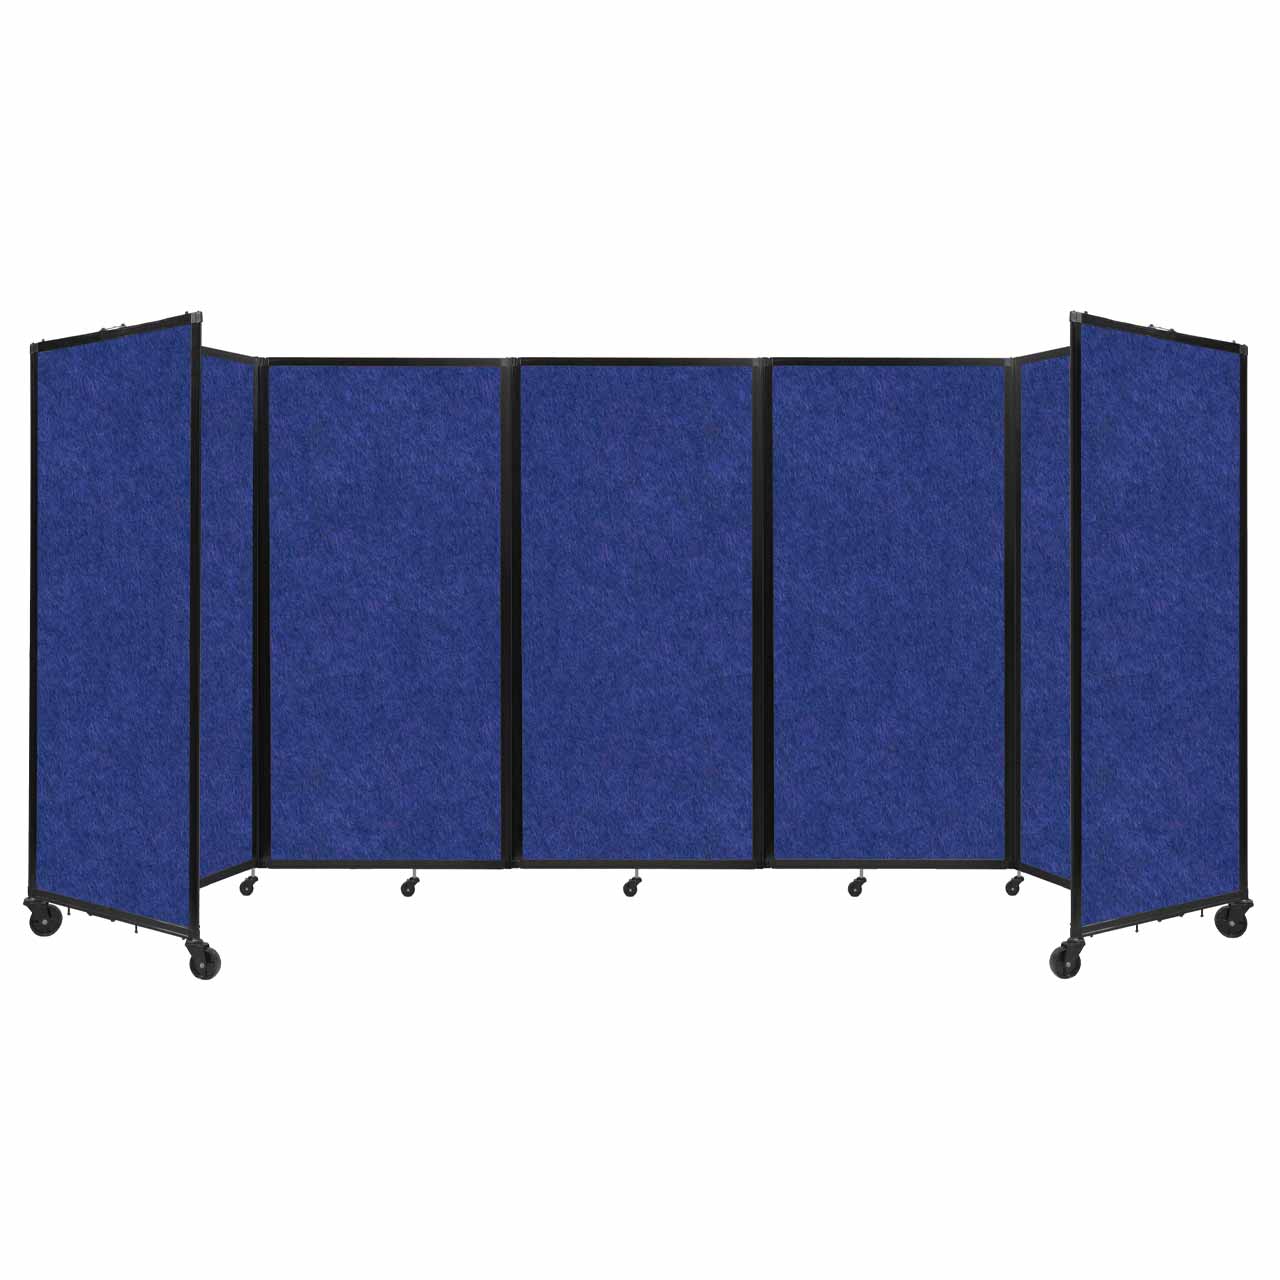 Room Divider 360° Folding Portable Partition with Soundsorb Acoustical Fabric Panels, 14' W x 6' H